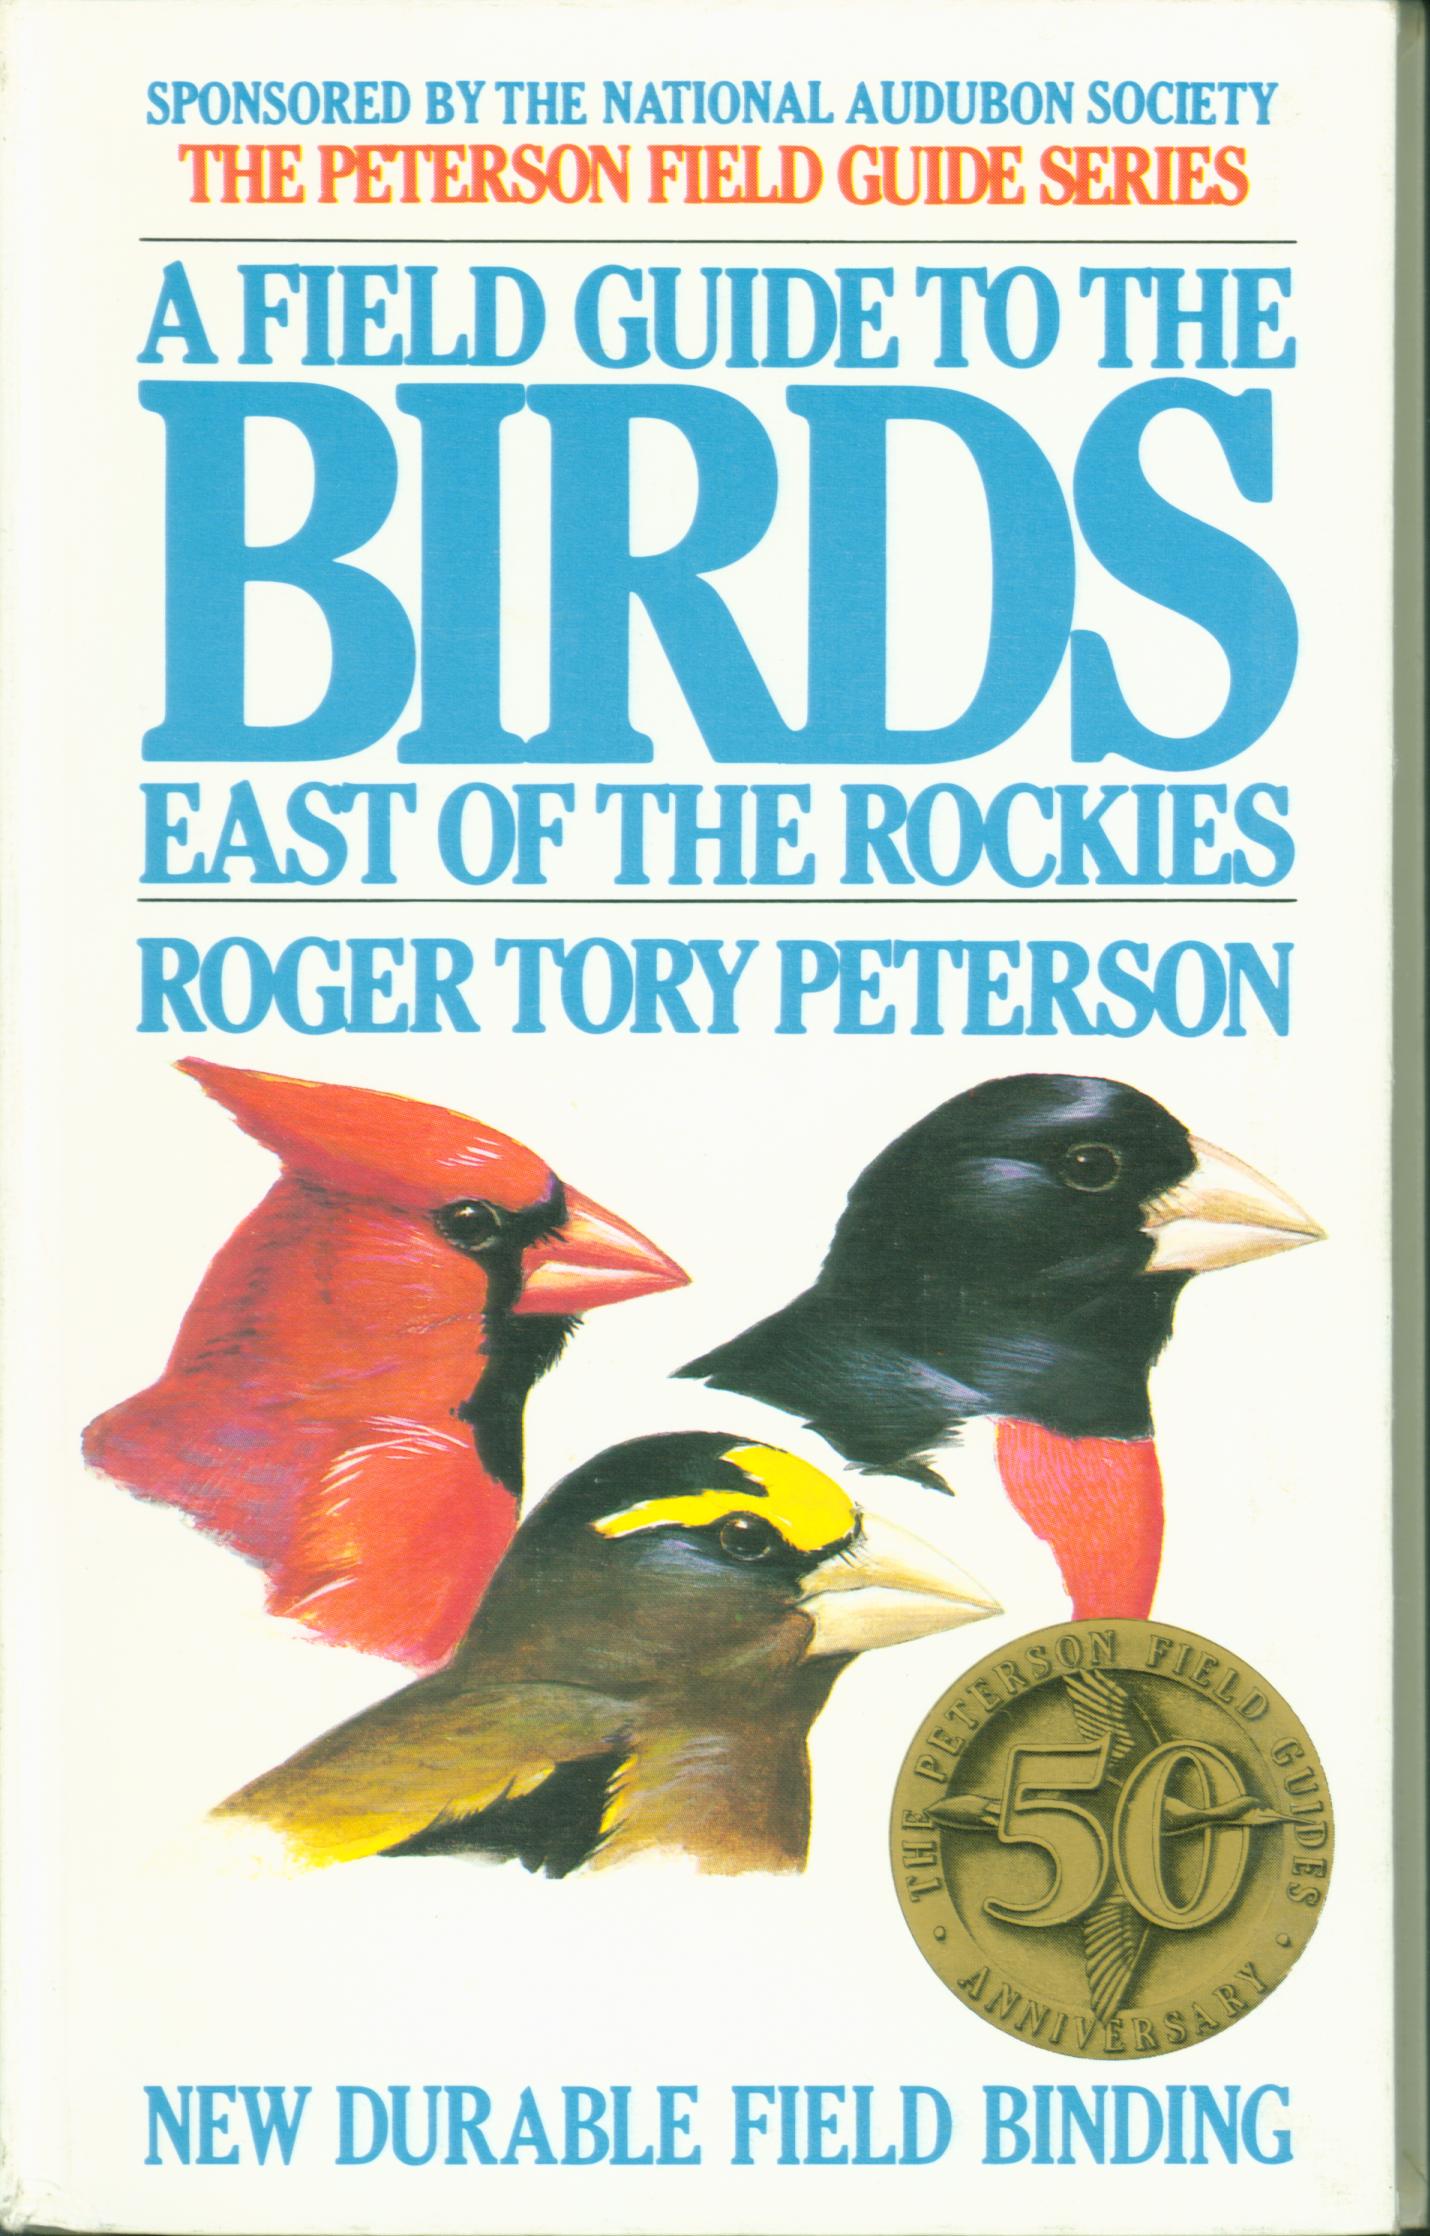 A FIELD GUIDE TO THE BIRDS EAST OF THE ROCKIES. 